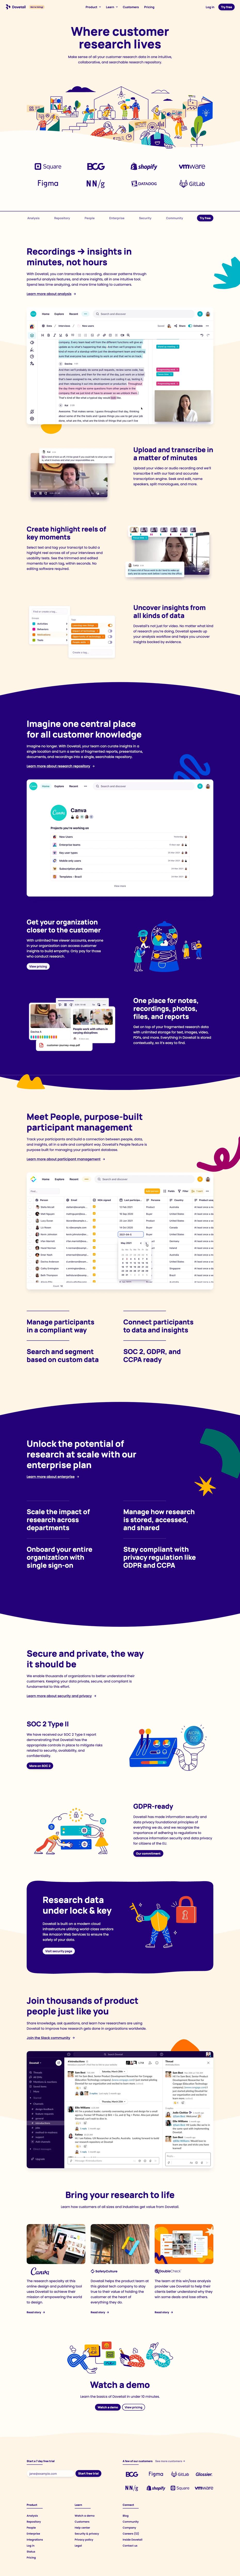 Dovetail Landing Page Example: Where customer research lives. Make sense of all kinds of customer research data in one intuitive, collaborative, and searchable research repository.